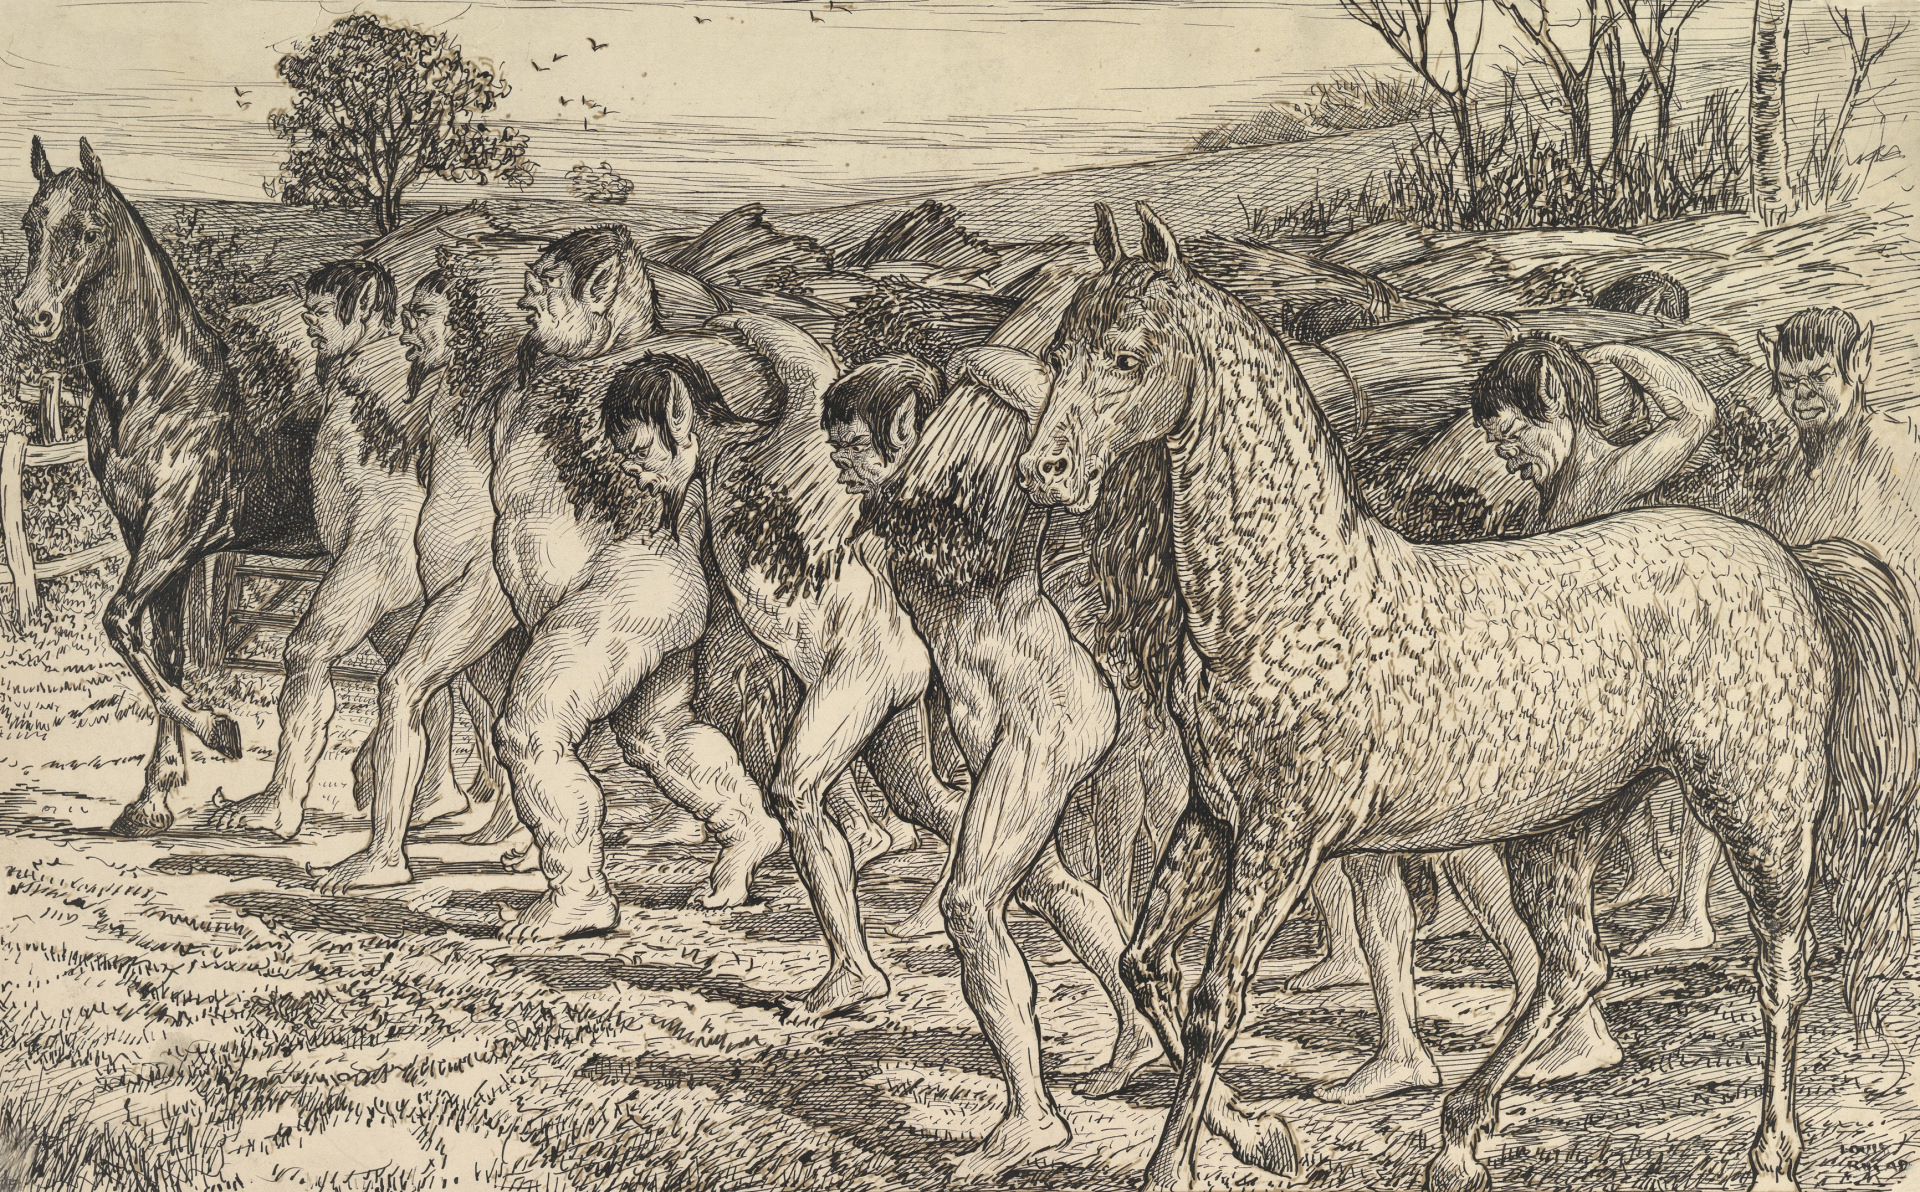 Louis John Rhead, Houyhnhnms driving a herd of Yahoos, from Jonathan Swift's Gulliver's Travels, Metropolitan Museum of Art